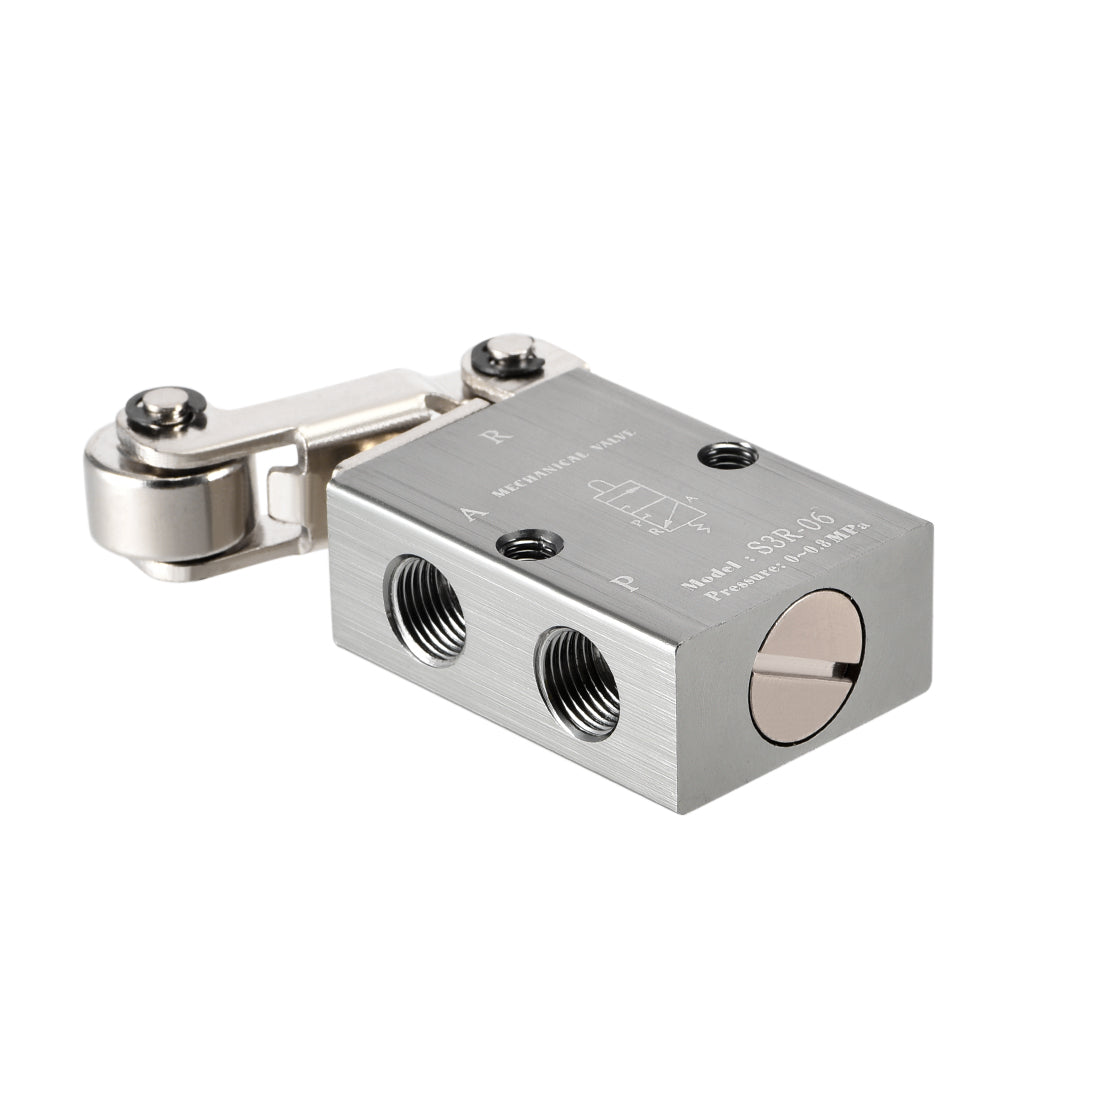 uxcell Uxcell S3R-06 2 Position 3 Way 1/8" PT Manual Hand Pull Pneumatic Solenoid Mechanical Valve